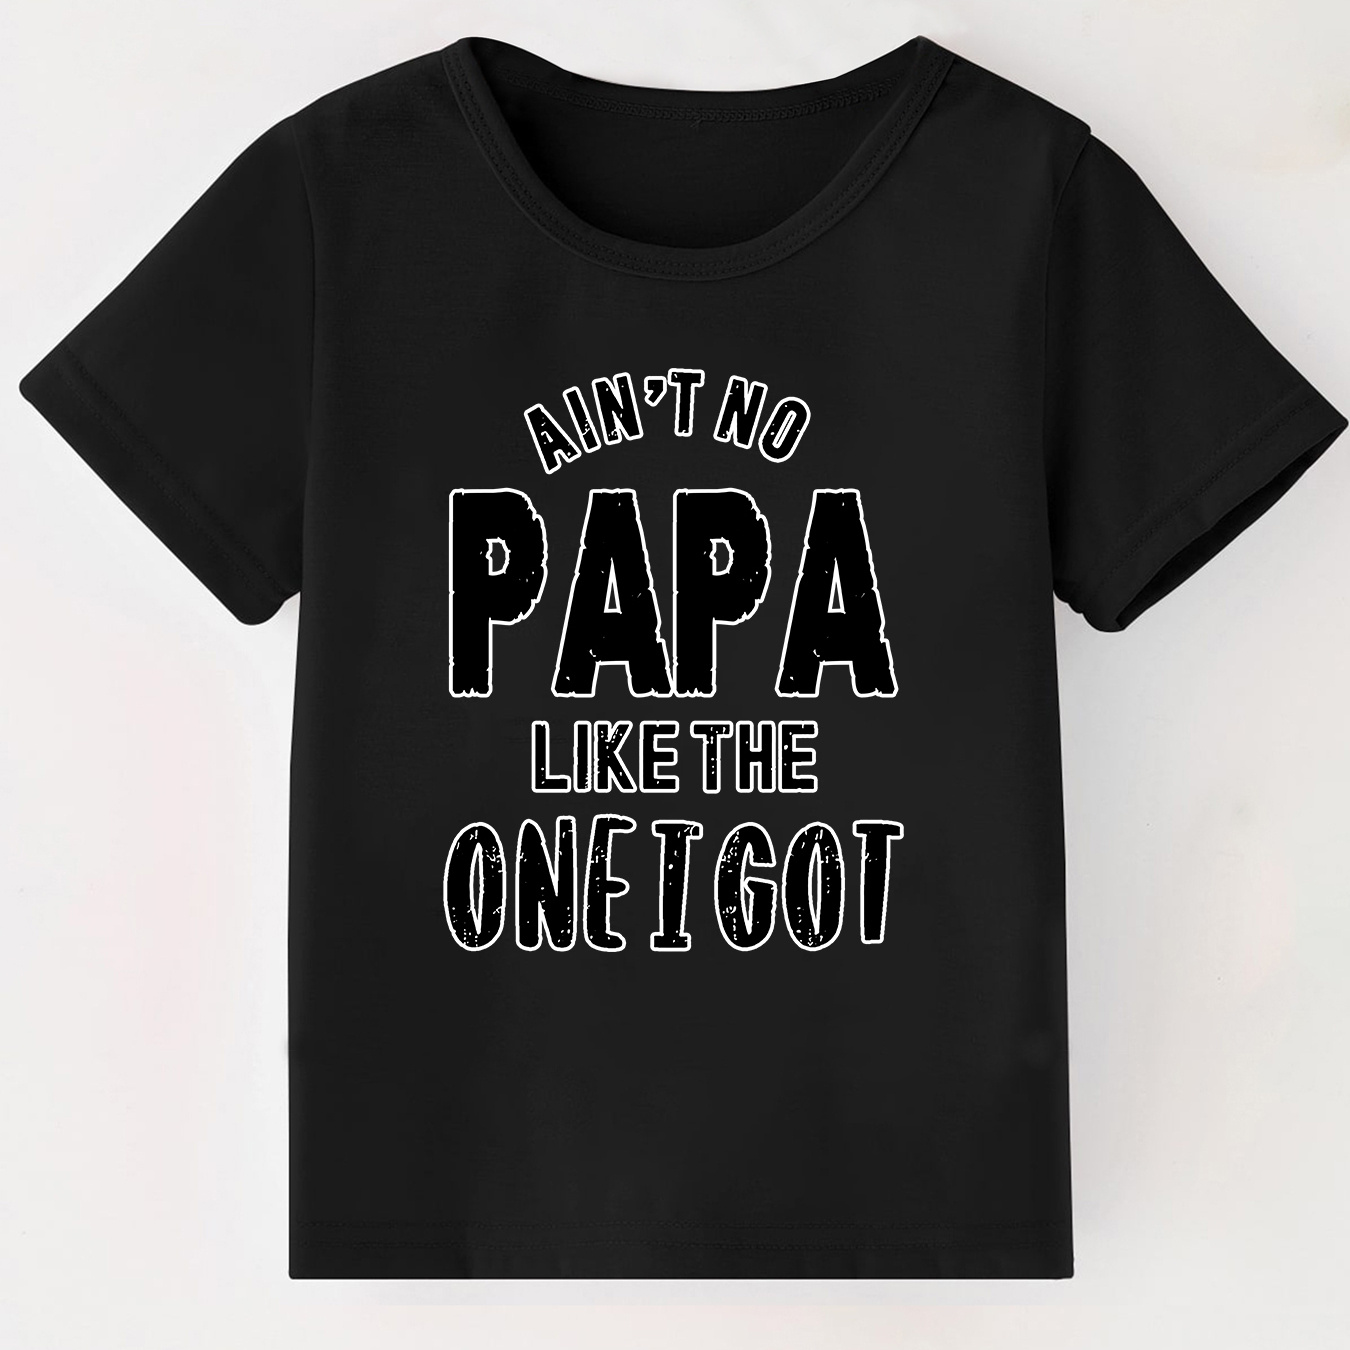 

Ain't No Papa Letters Print T-shirt, Cute Short Sleeve Crew Neck Casual Daily Tops, Boy's Clothing